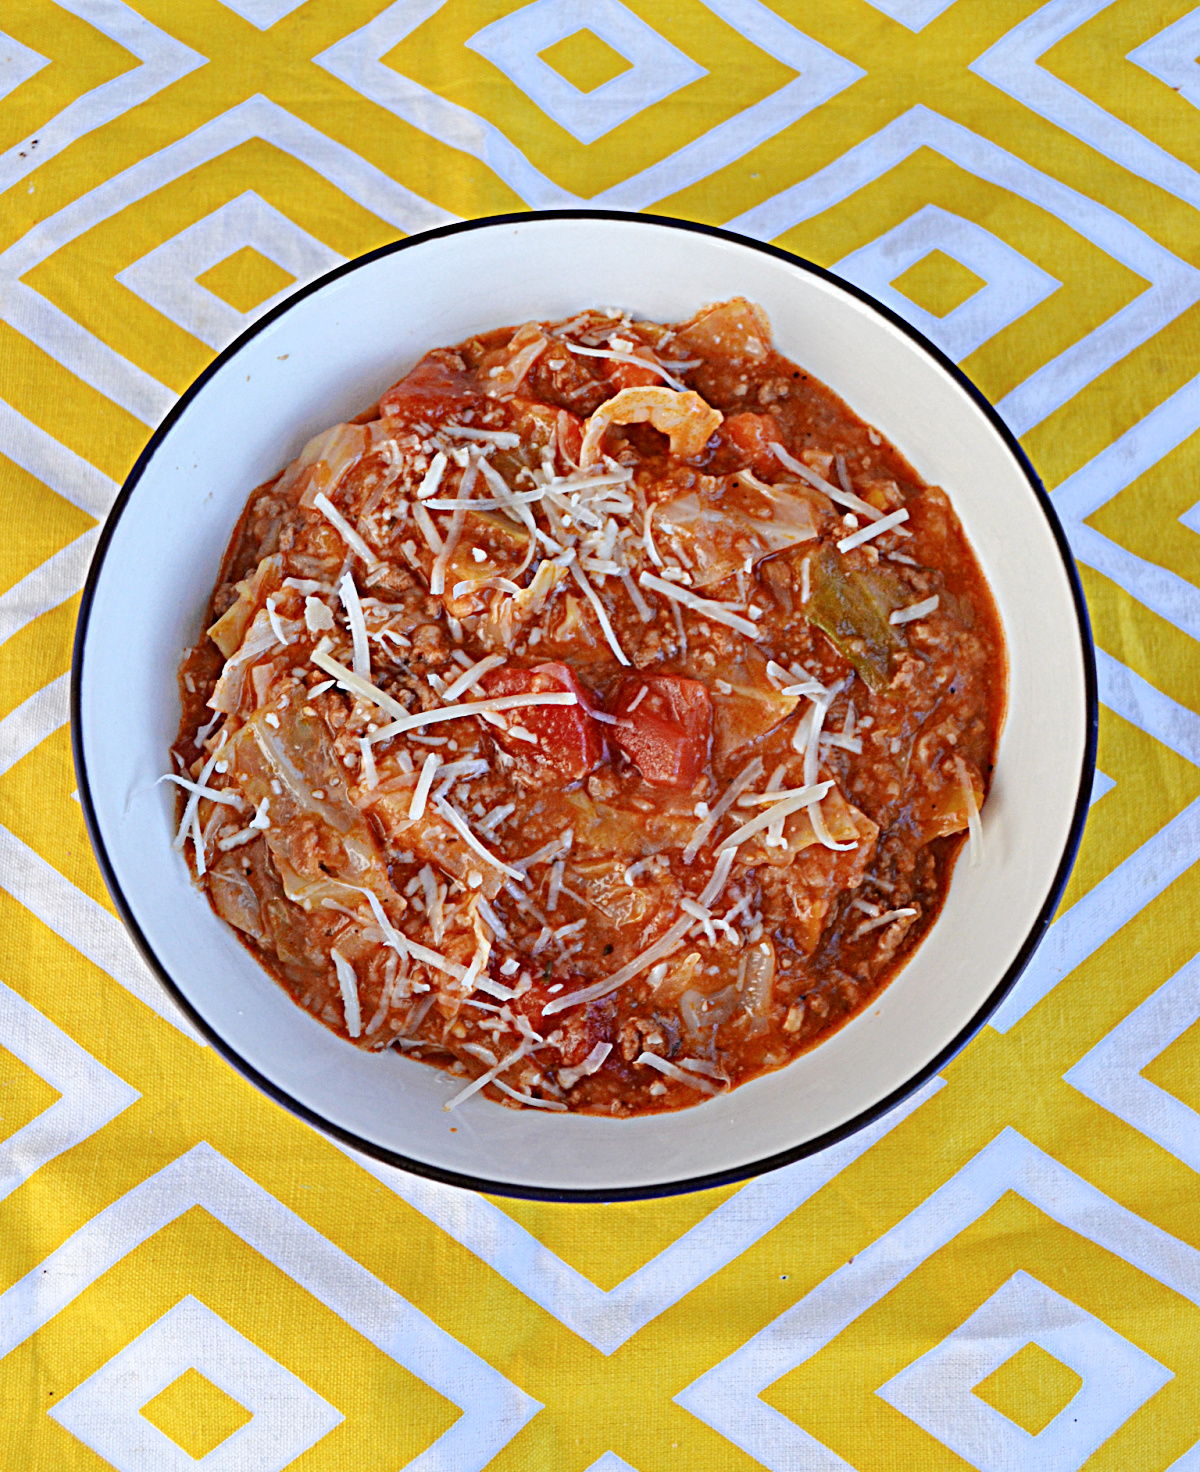 Stuffed Cabbage Roll Soup